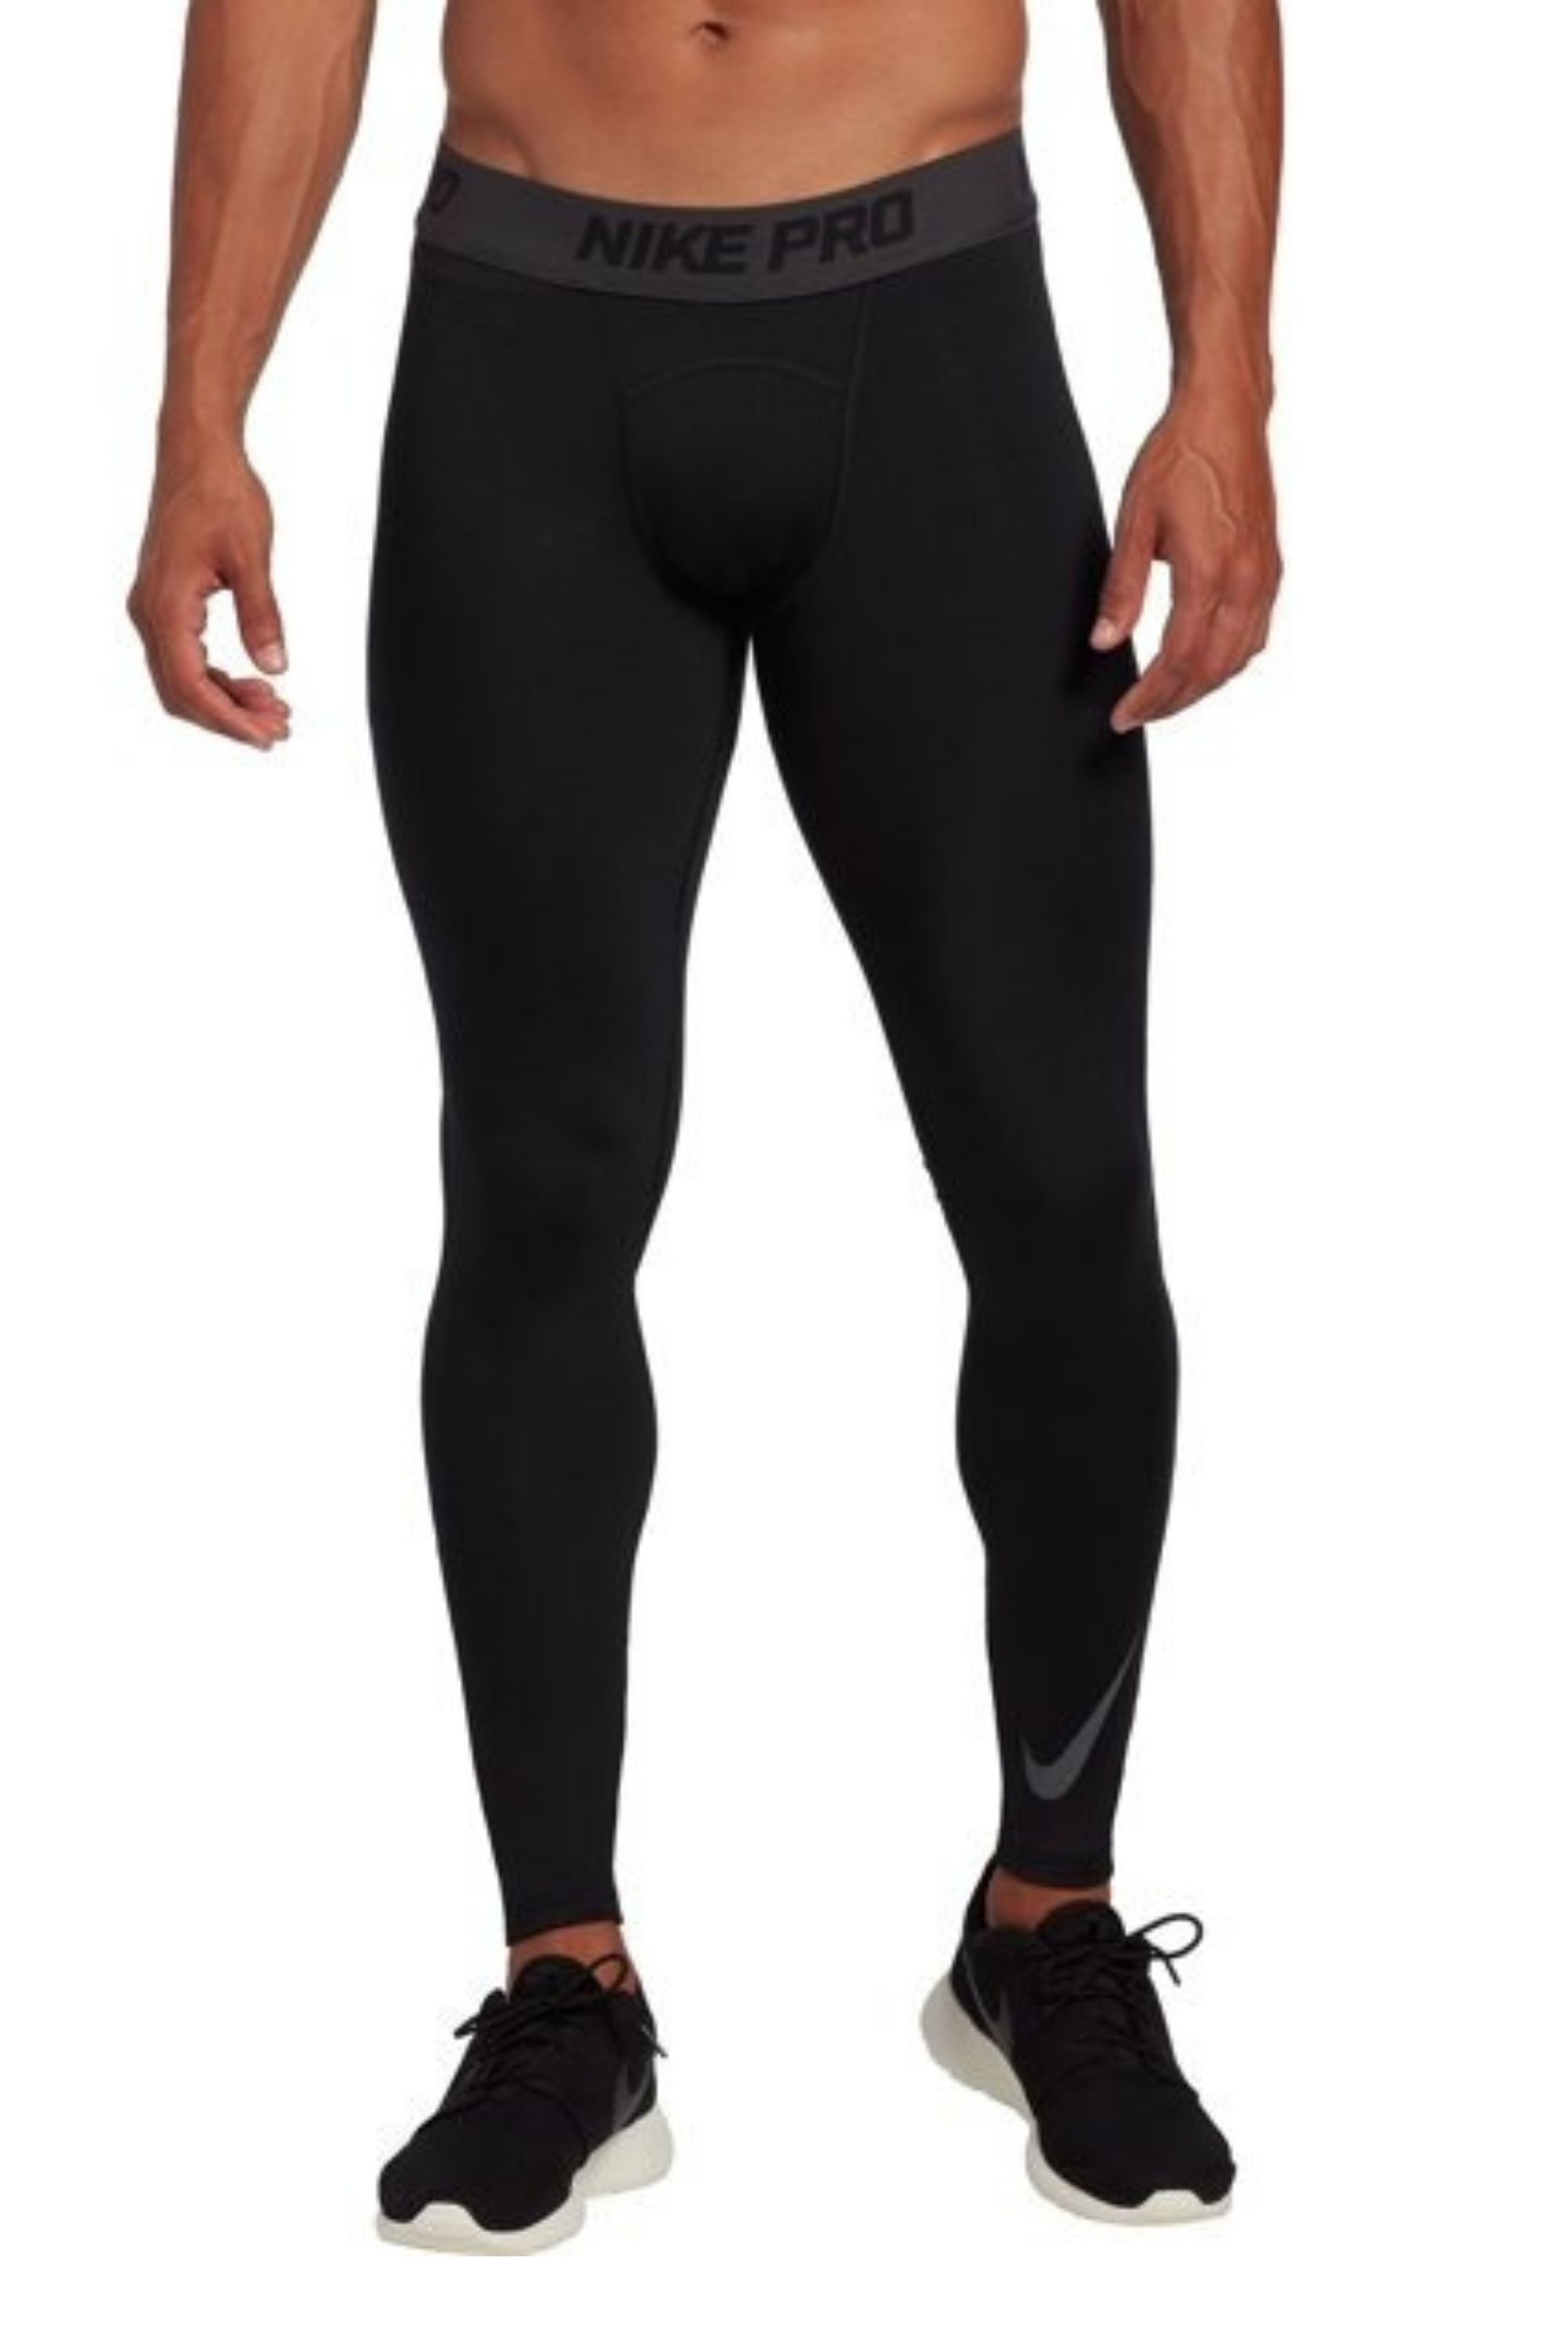 Mens Compression Under Base Layer Shorts Gym Pants Jogger Fitness Tights Trouser 